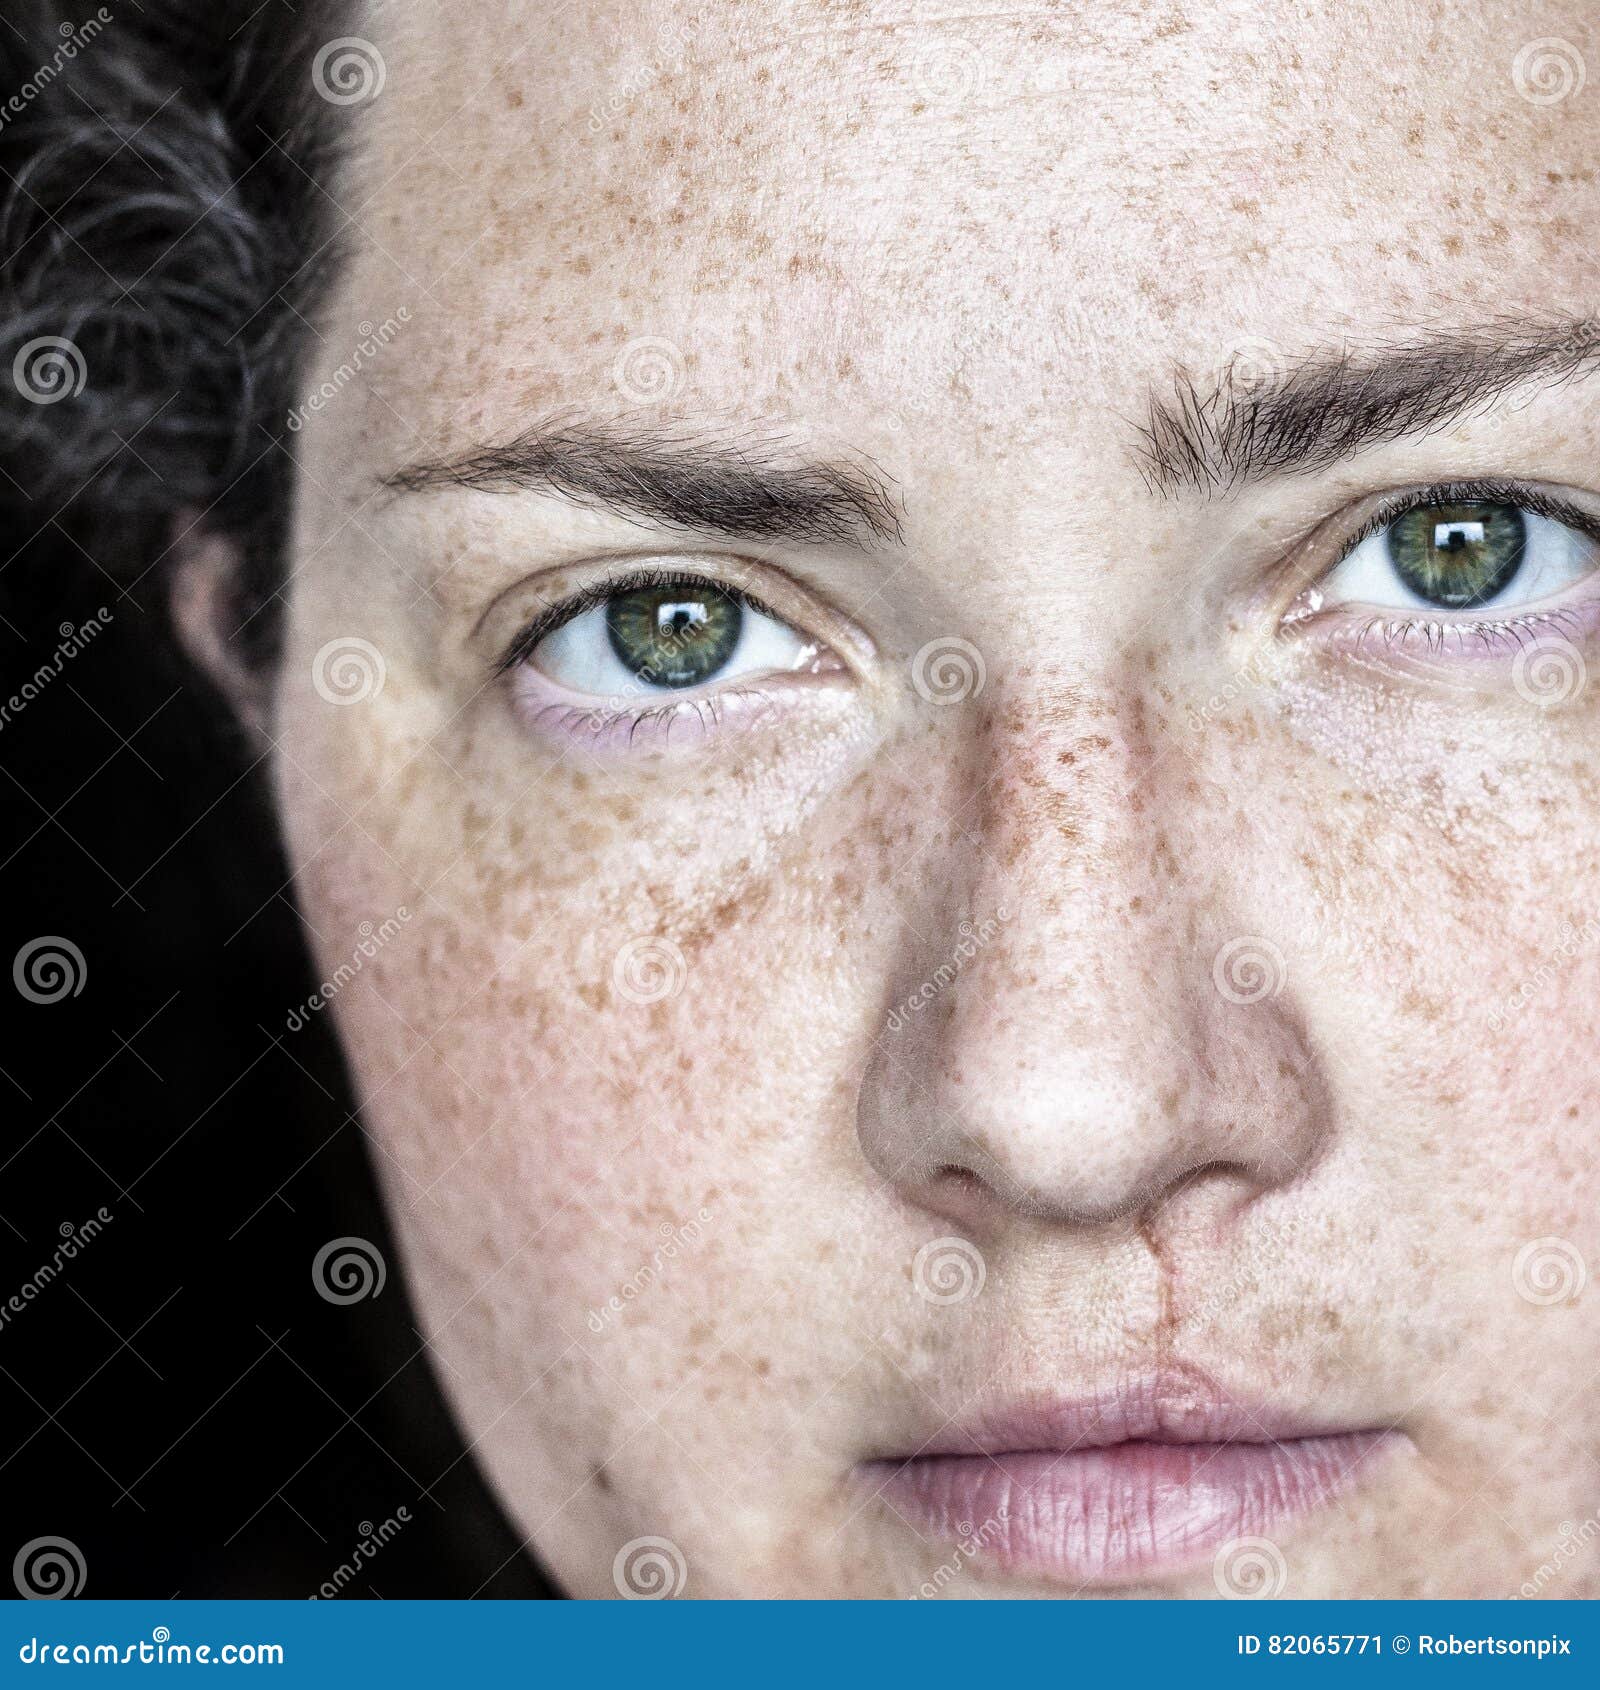 closeup portrait of caucasian woman with freckles and cleft lip looking directly at camera.